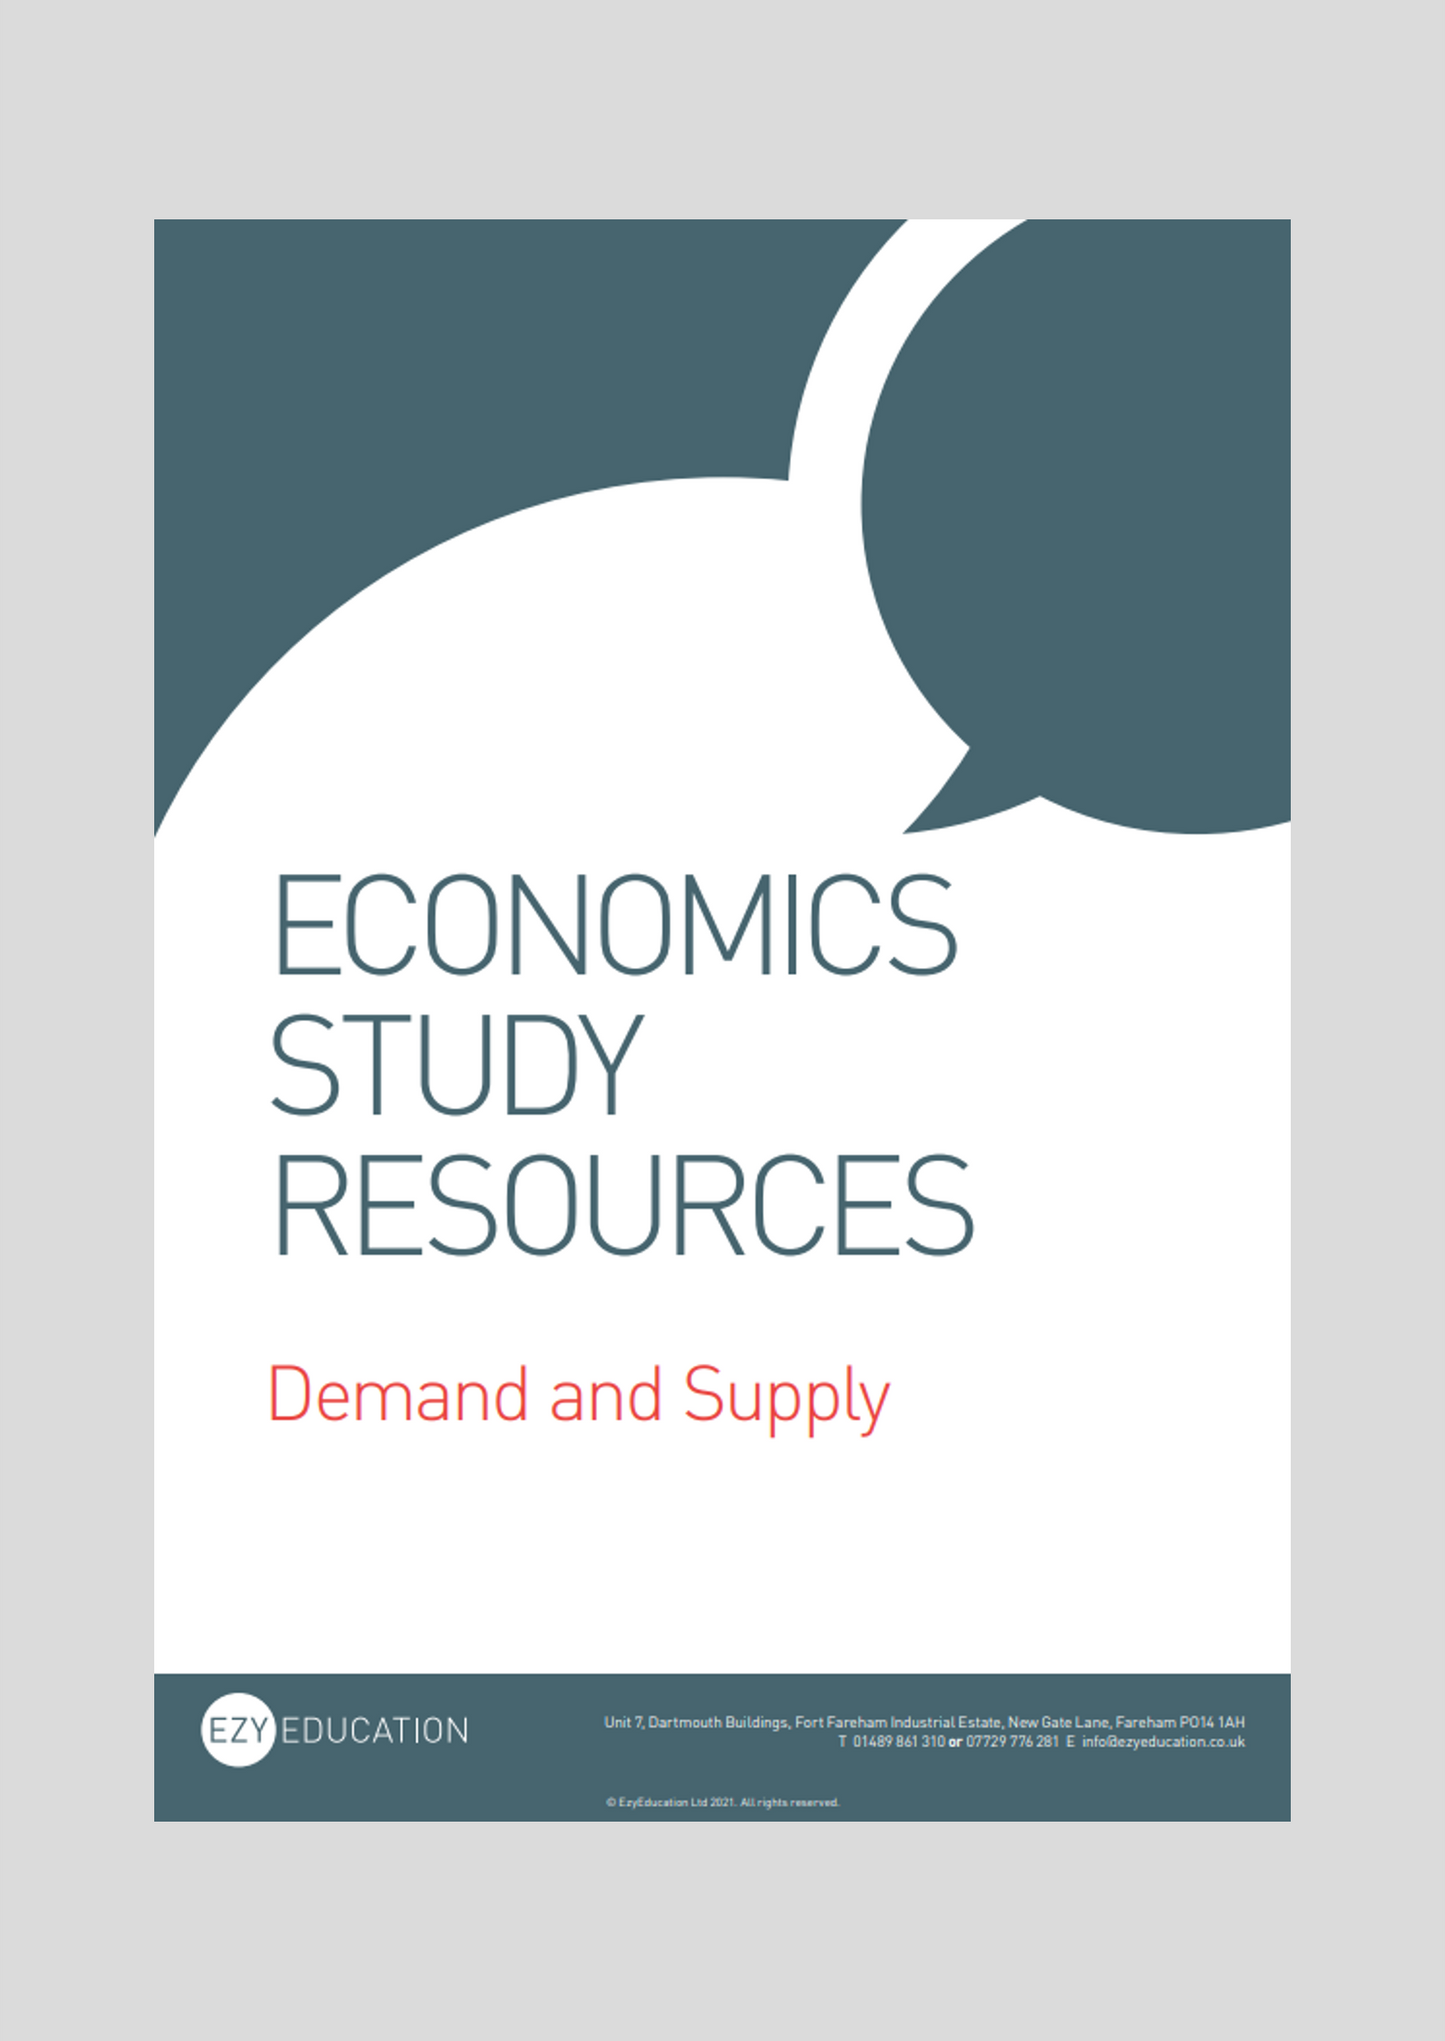 A-Level Microeconomics Study Guide - Module 2: Demand and Supply Diagrams